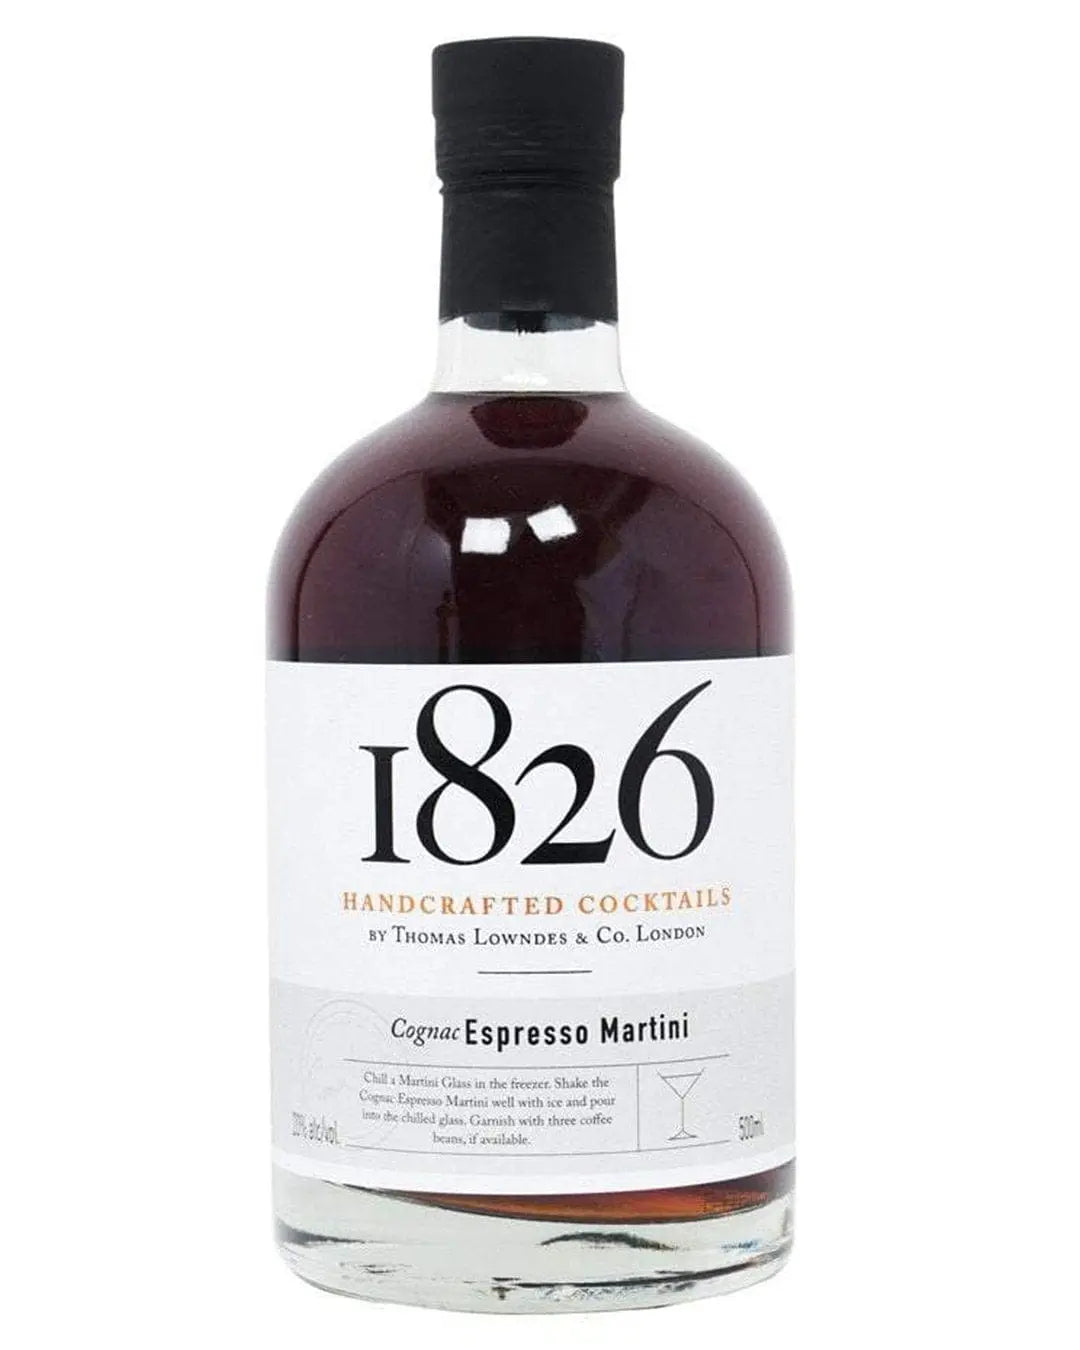 1826 Courvoisier Espresso Martini Handcrafted Premixed Cocktail, 50 cl Ready Made Cocktails